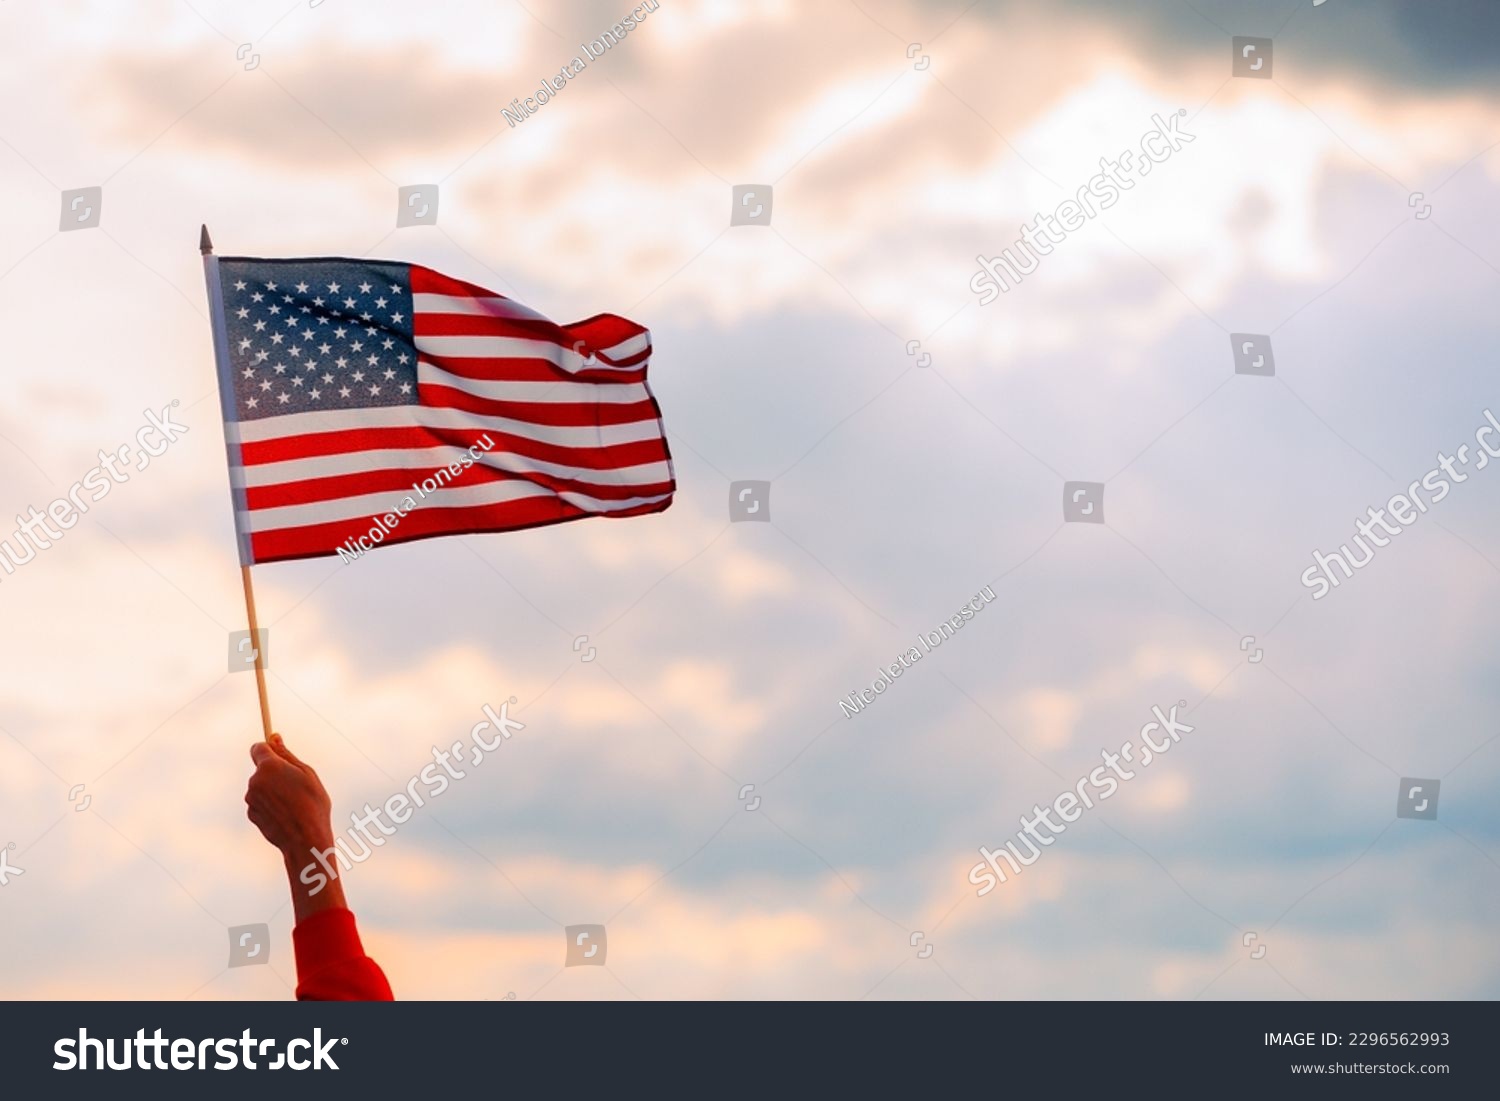 
Hand Waving the Flag of the United Stated of America. Optimistic person holding American flag celebrating citizenship
 #2296562993